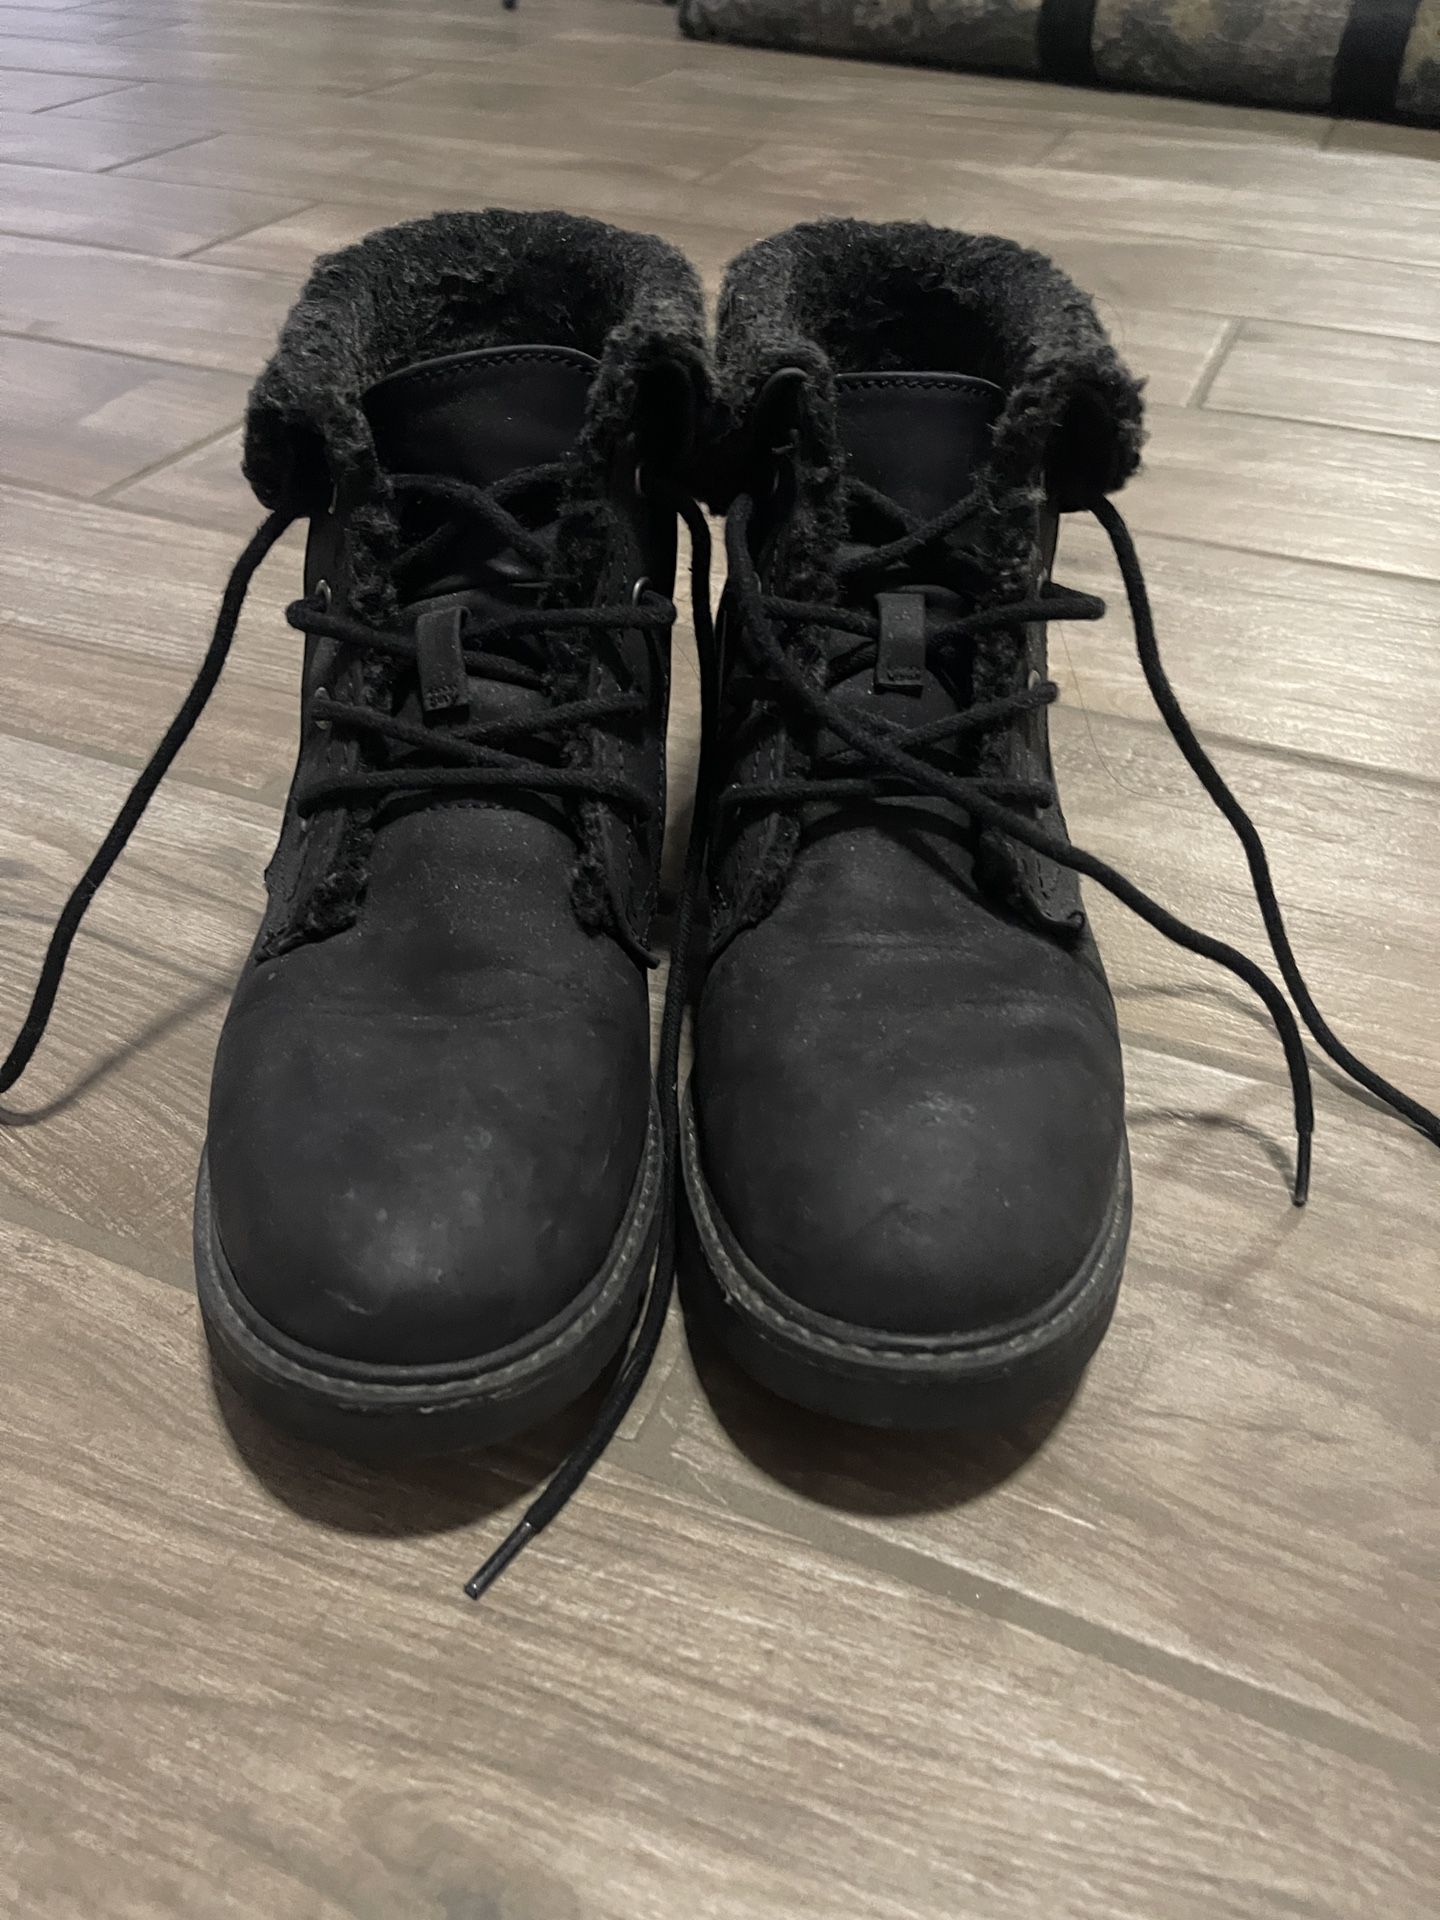 Women’s Boots Size 9 